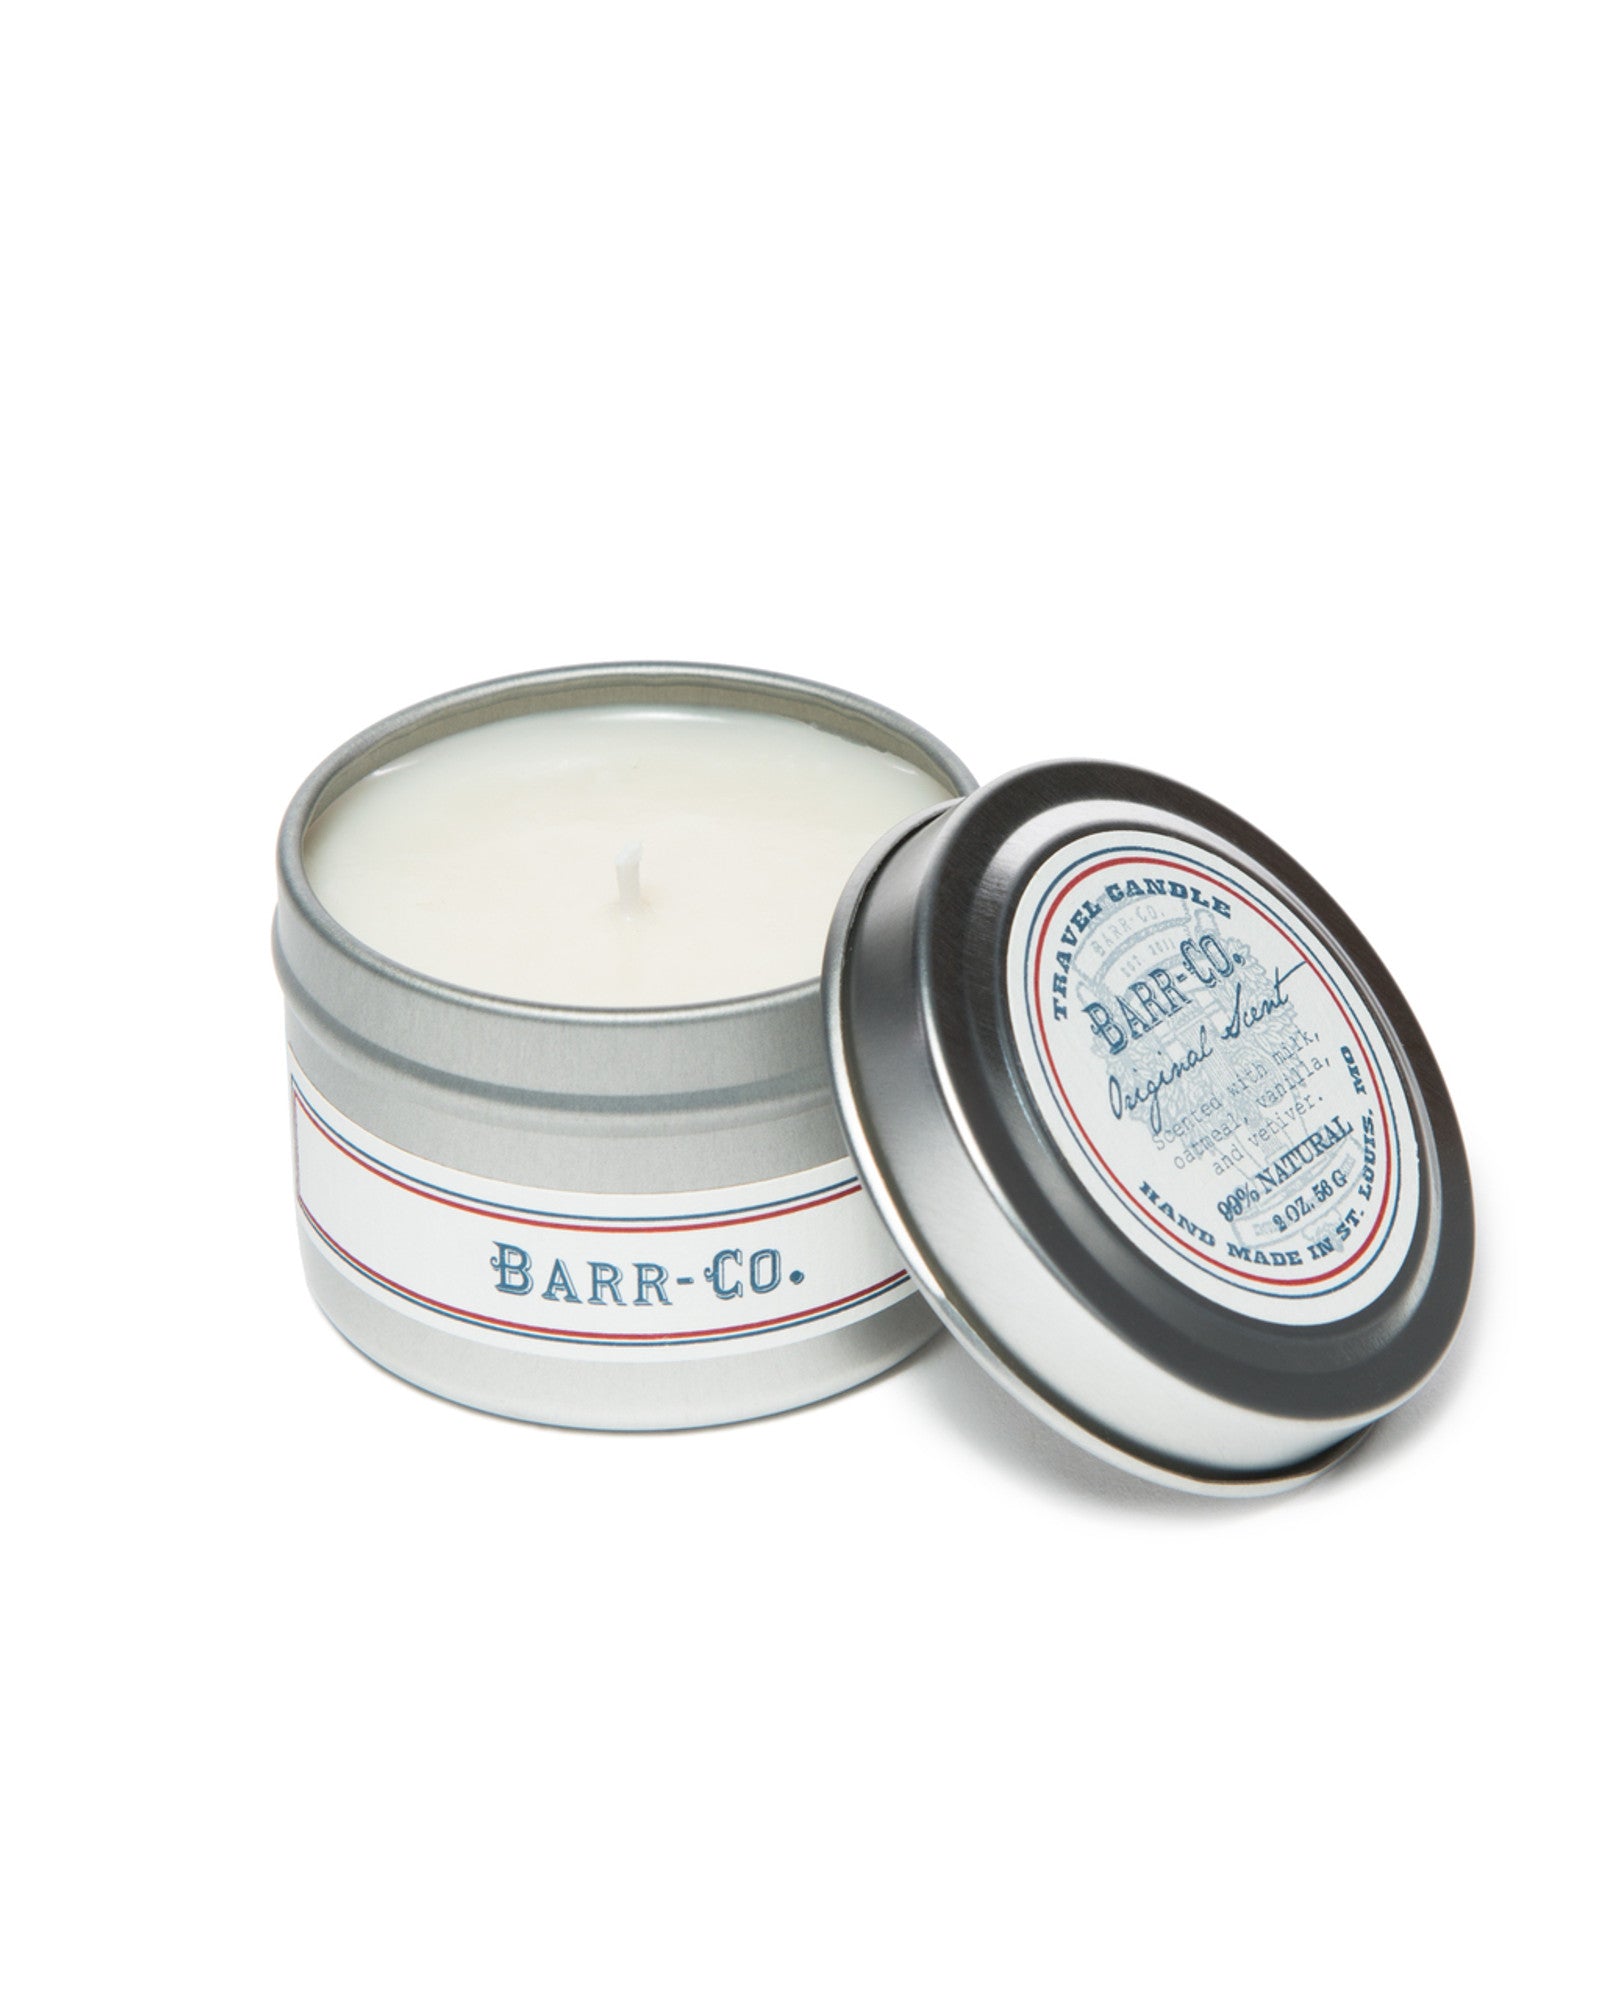 Barr-Co. Travel Candle